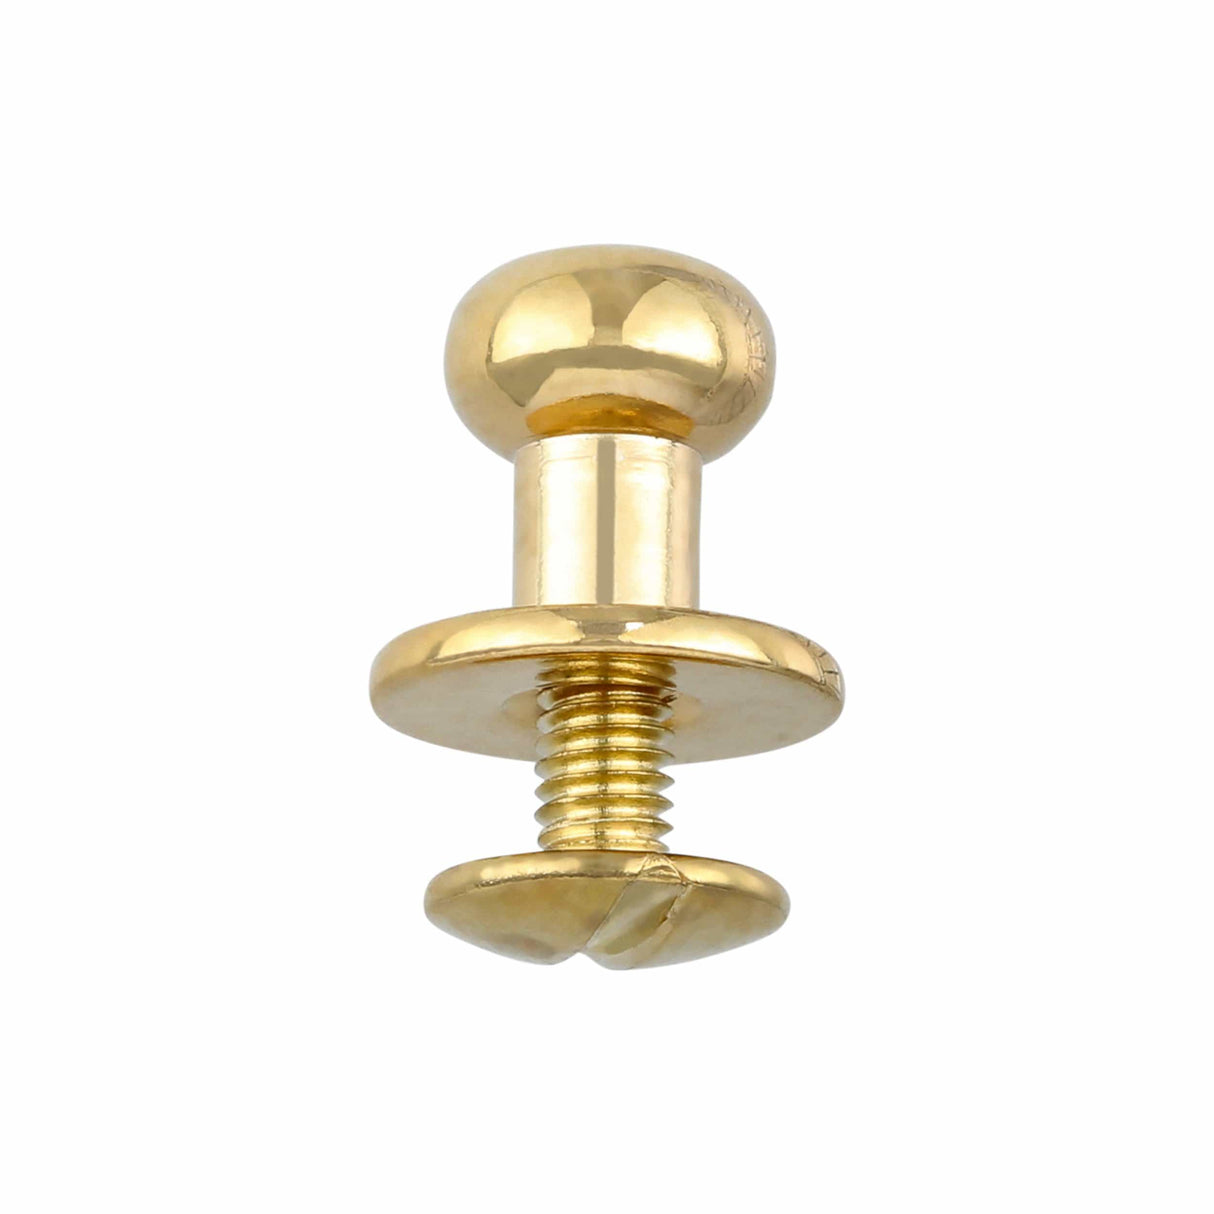 10mm, Shiny Gold, Flat Top Collar Button Stud with Screw, Solid